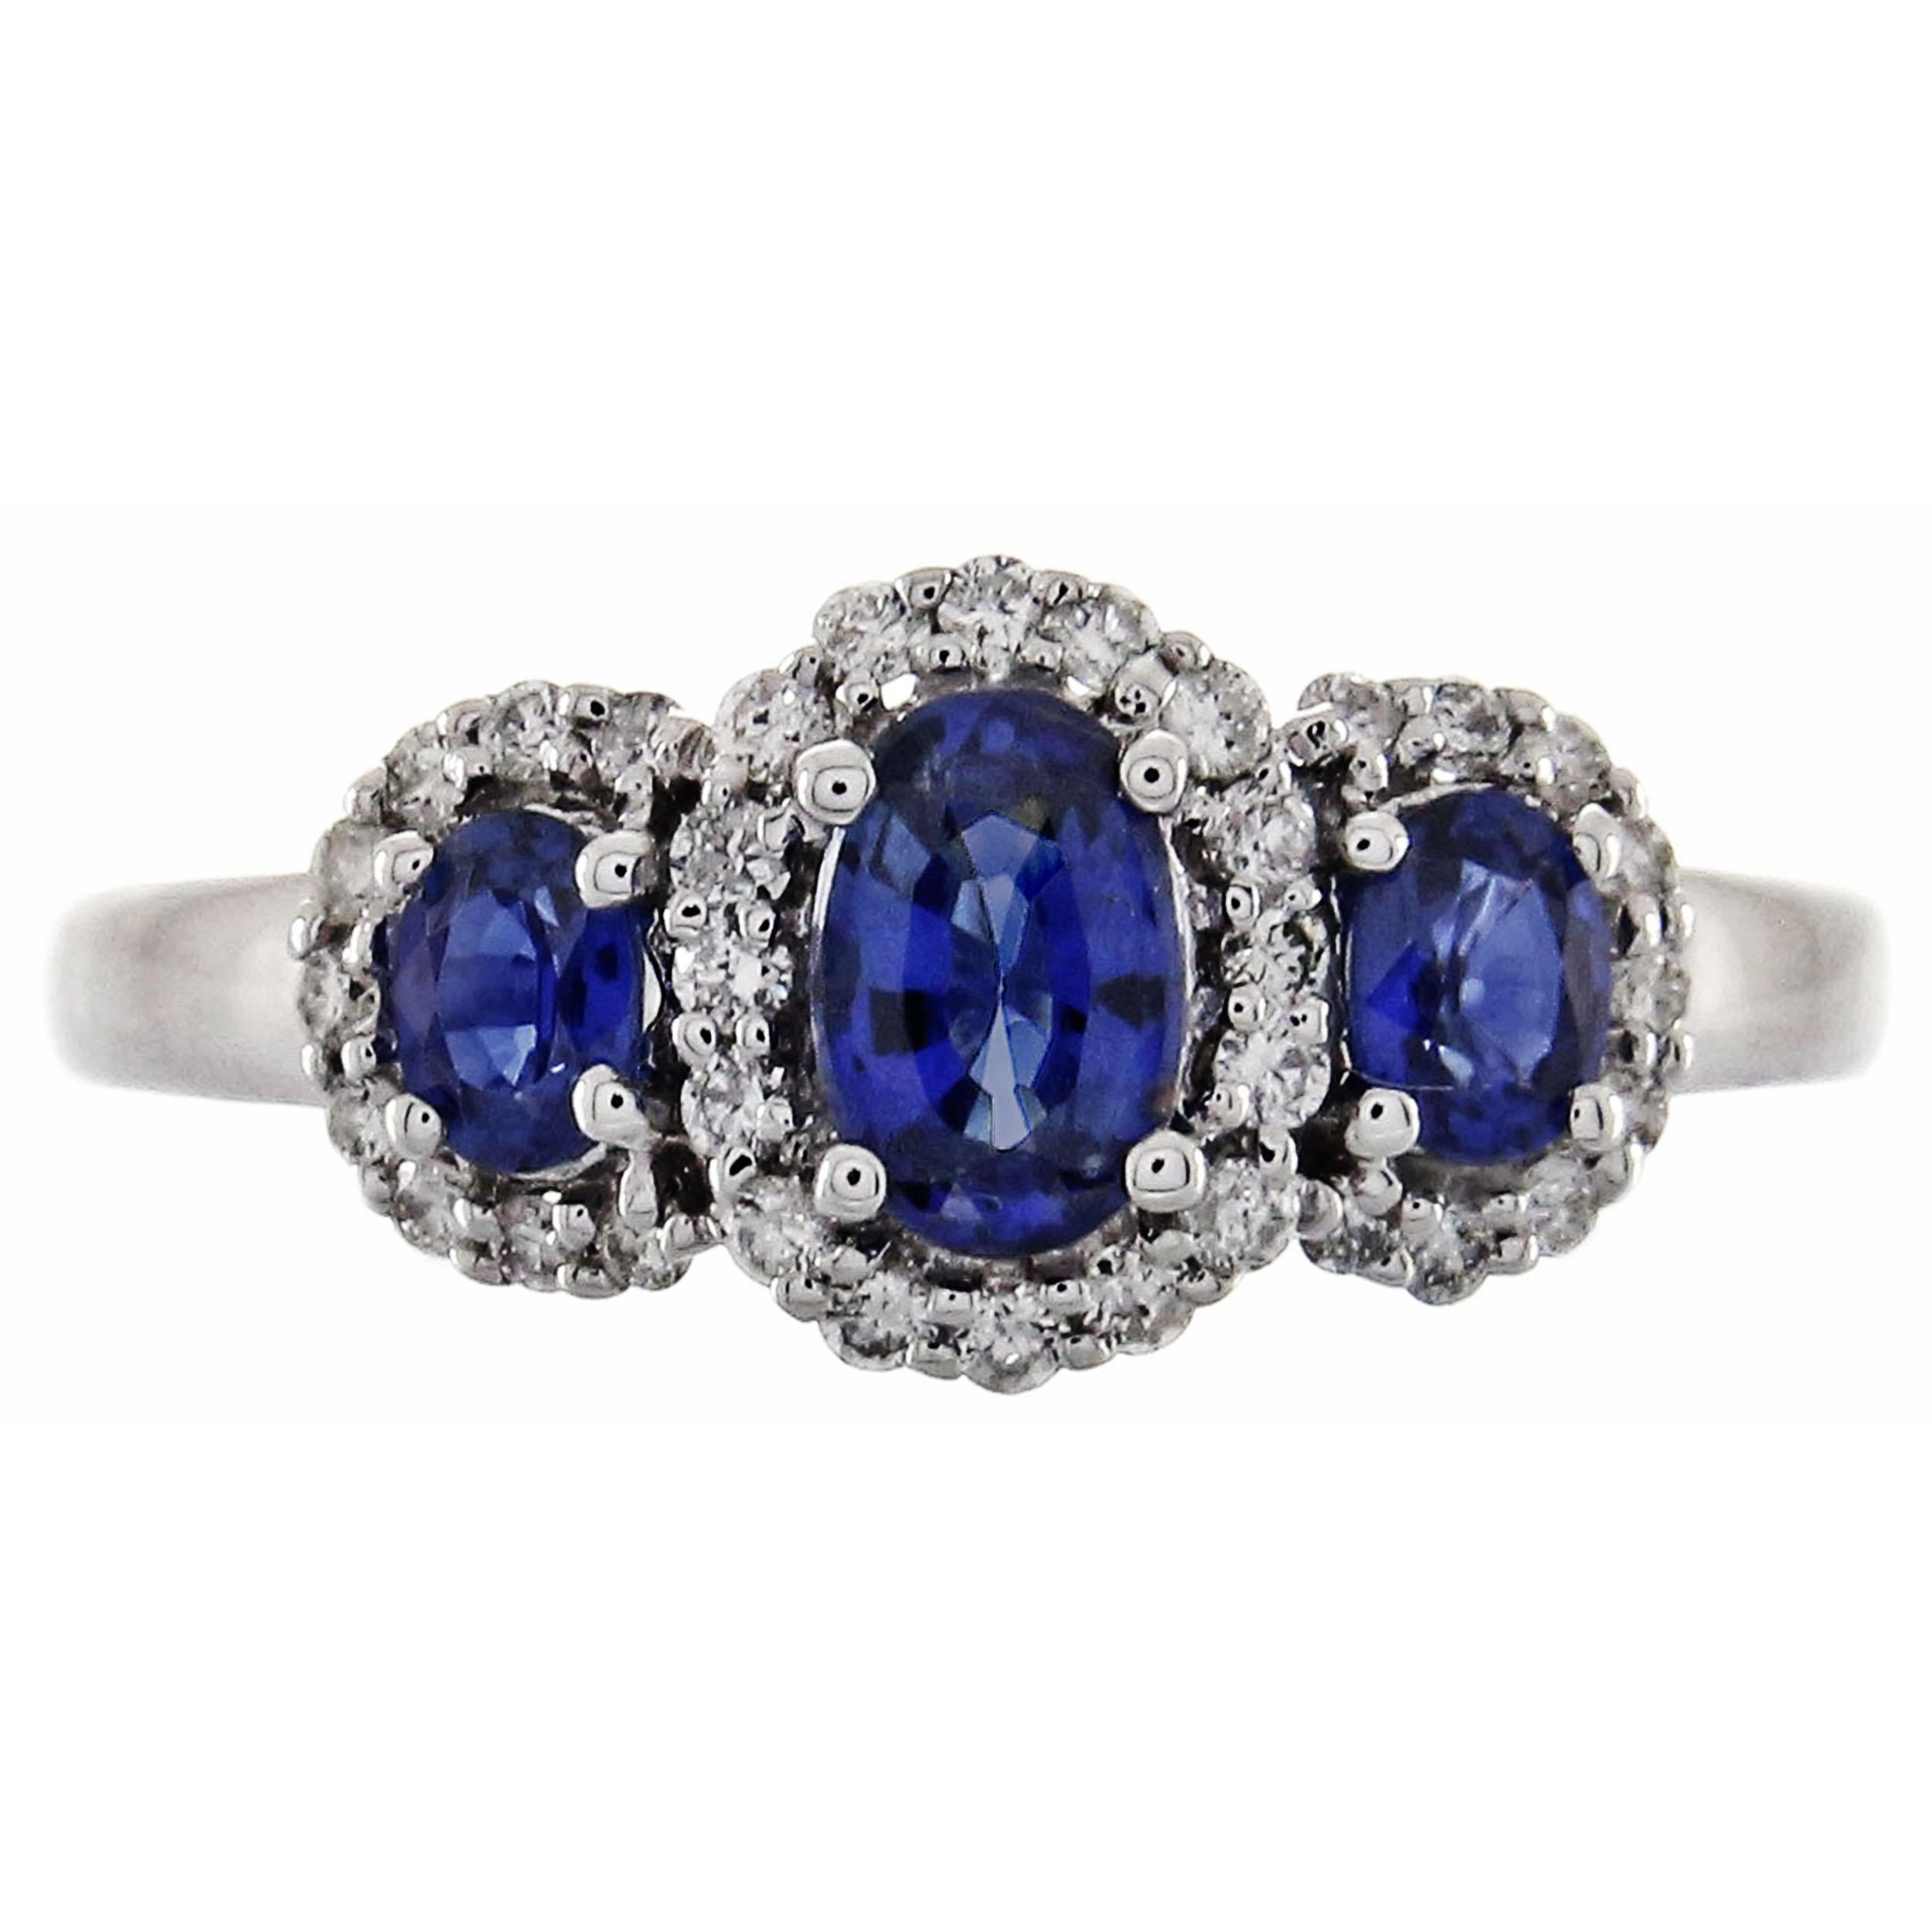 1.15 Carat Oval-Cut Blue Sapphire Diamond Accents 14K White Gold Bridal Ring In New Condition For Sale In New York, NY